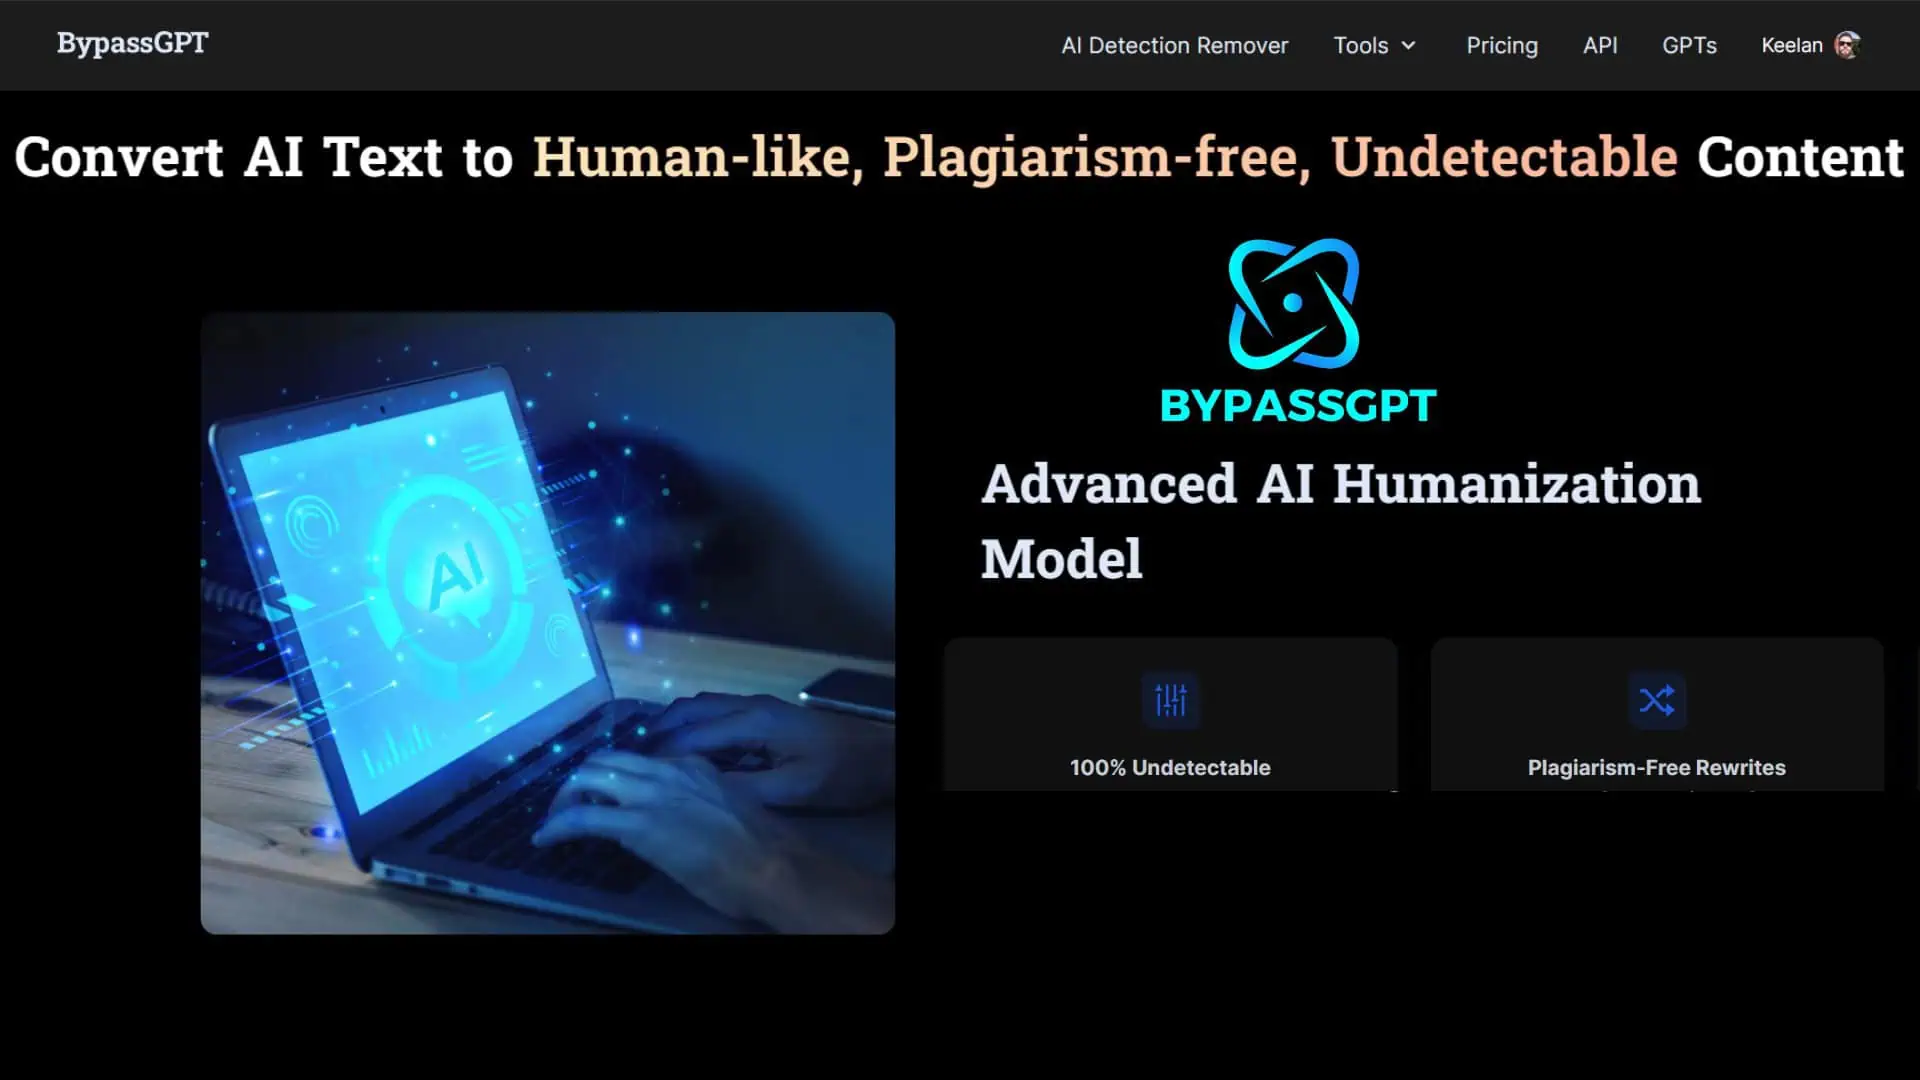 Bypass GPT AI review